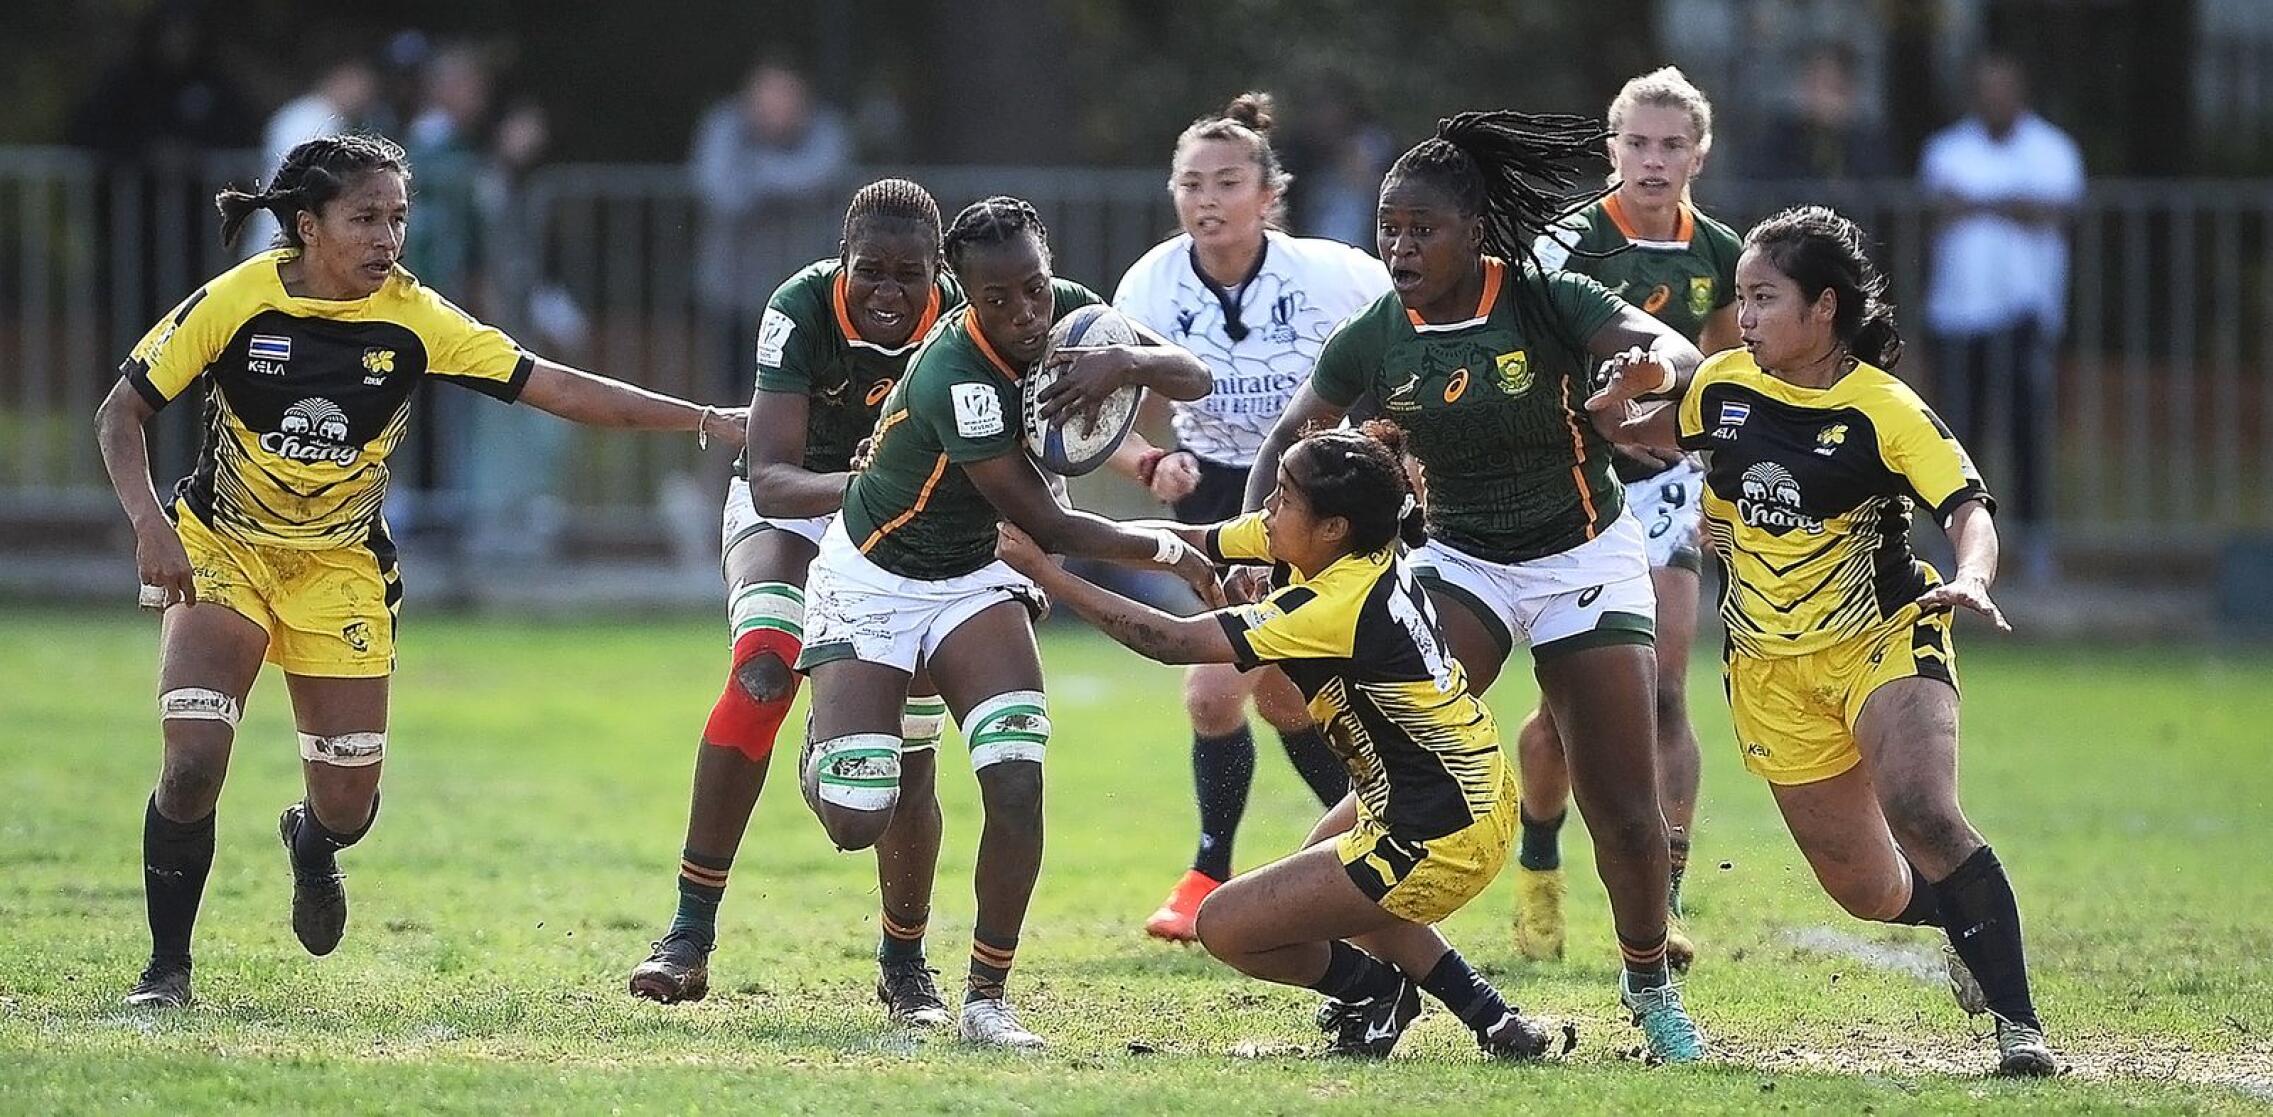 Kemiketso Baloyi with the ball for the Springbok Women’s Sevens team in their Challenger Series match against Thailand in Stellenbosch